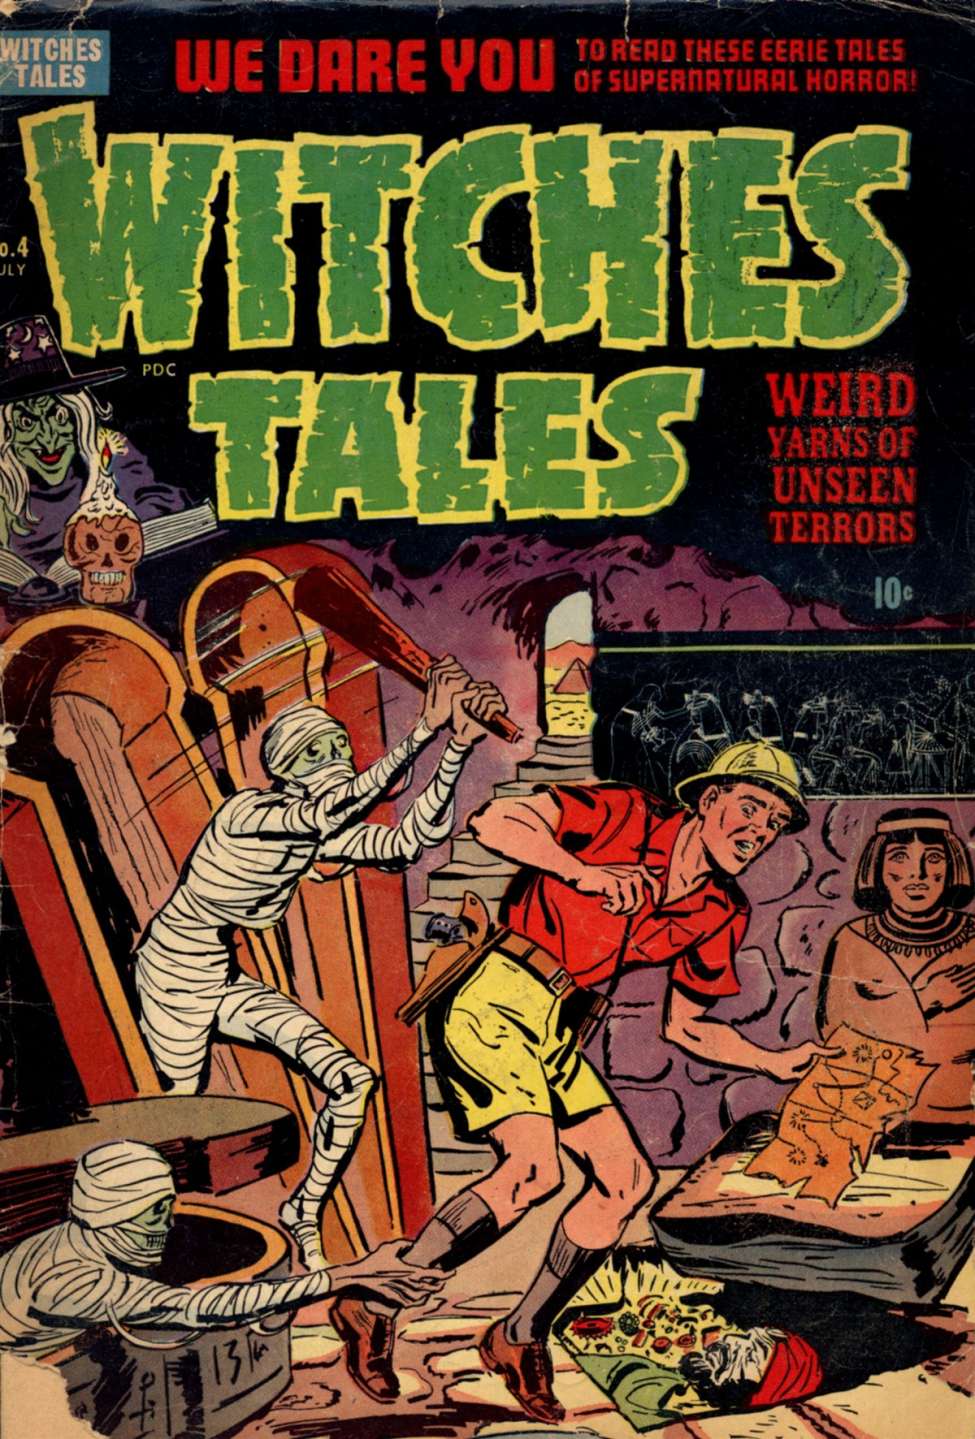 Book Cover For Witches Tales 4